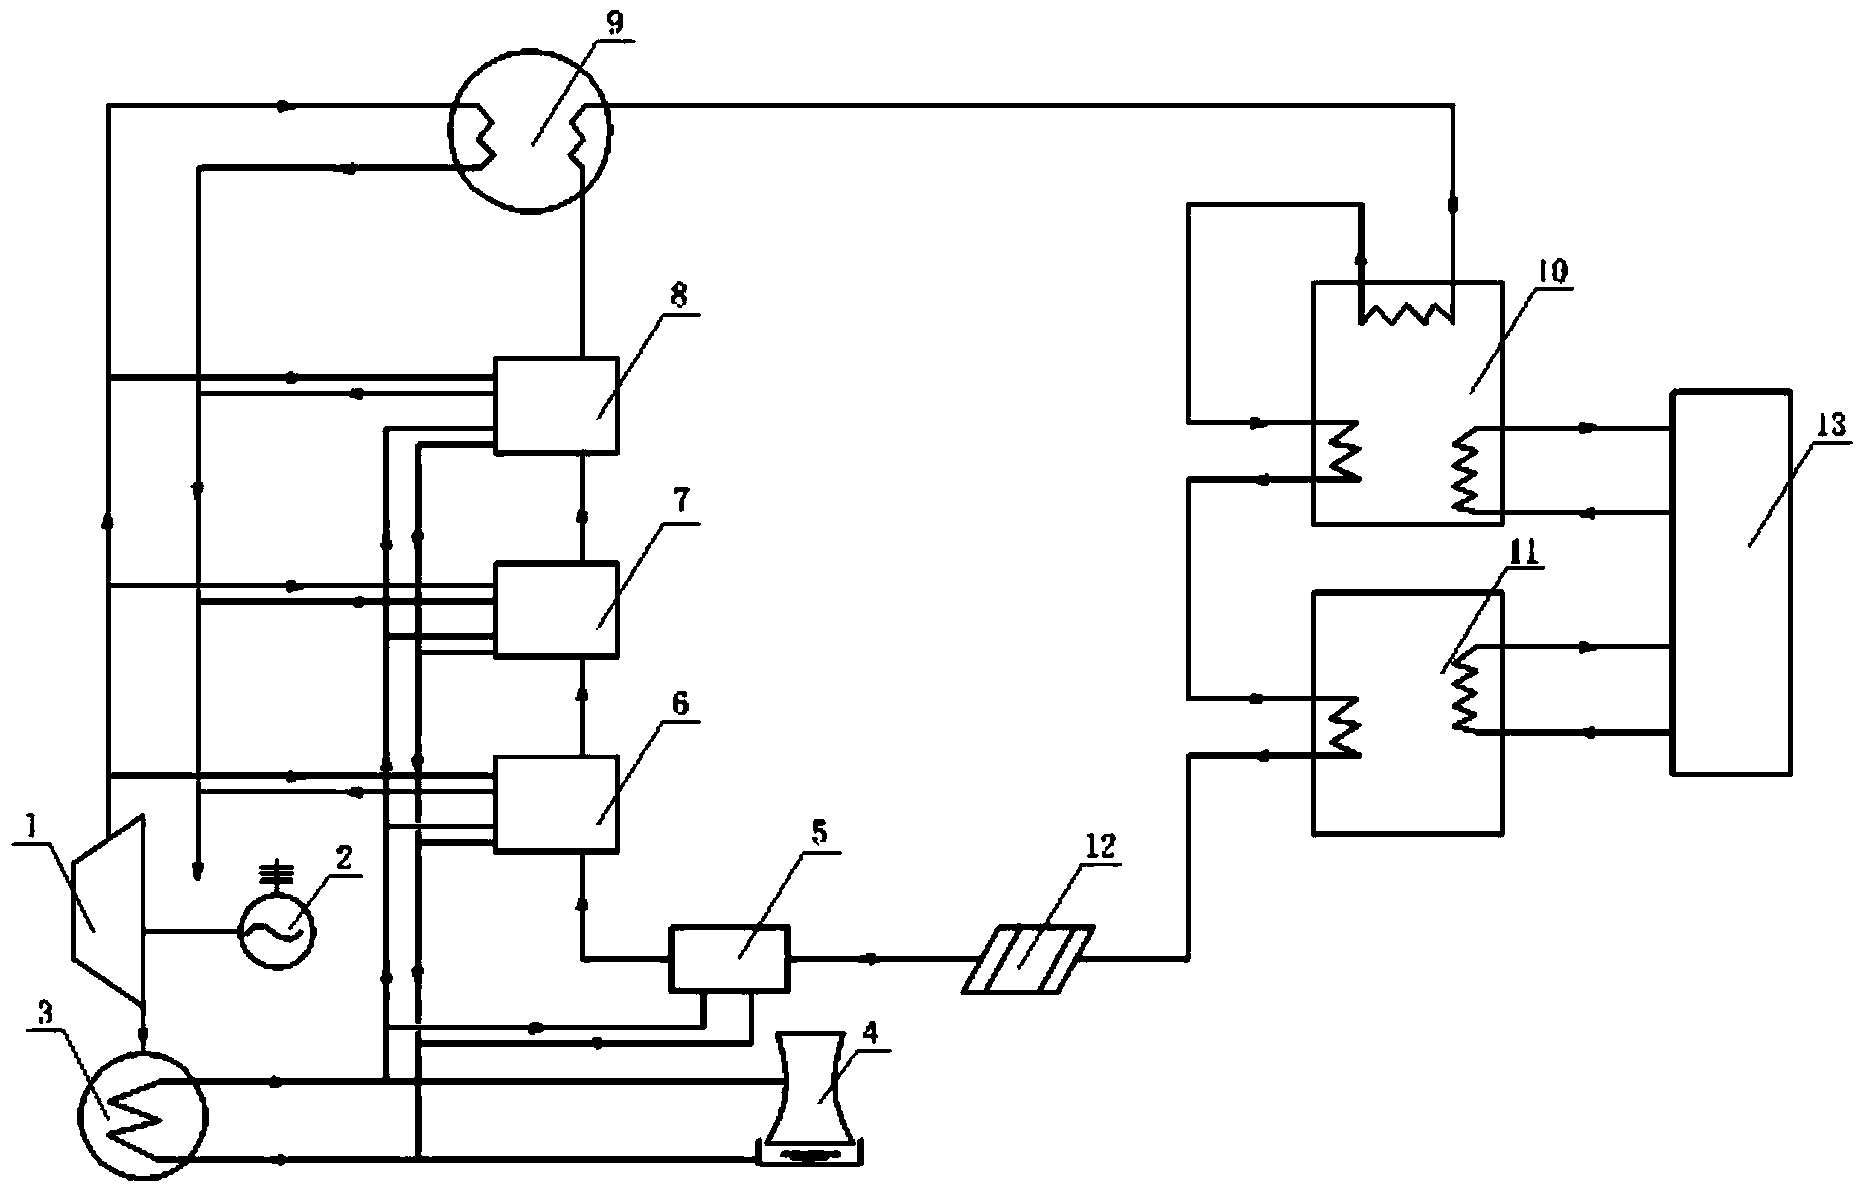 Heat and power cogeneration centralized heat supply system based on heat pump